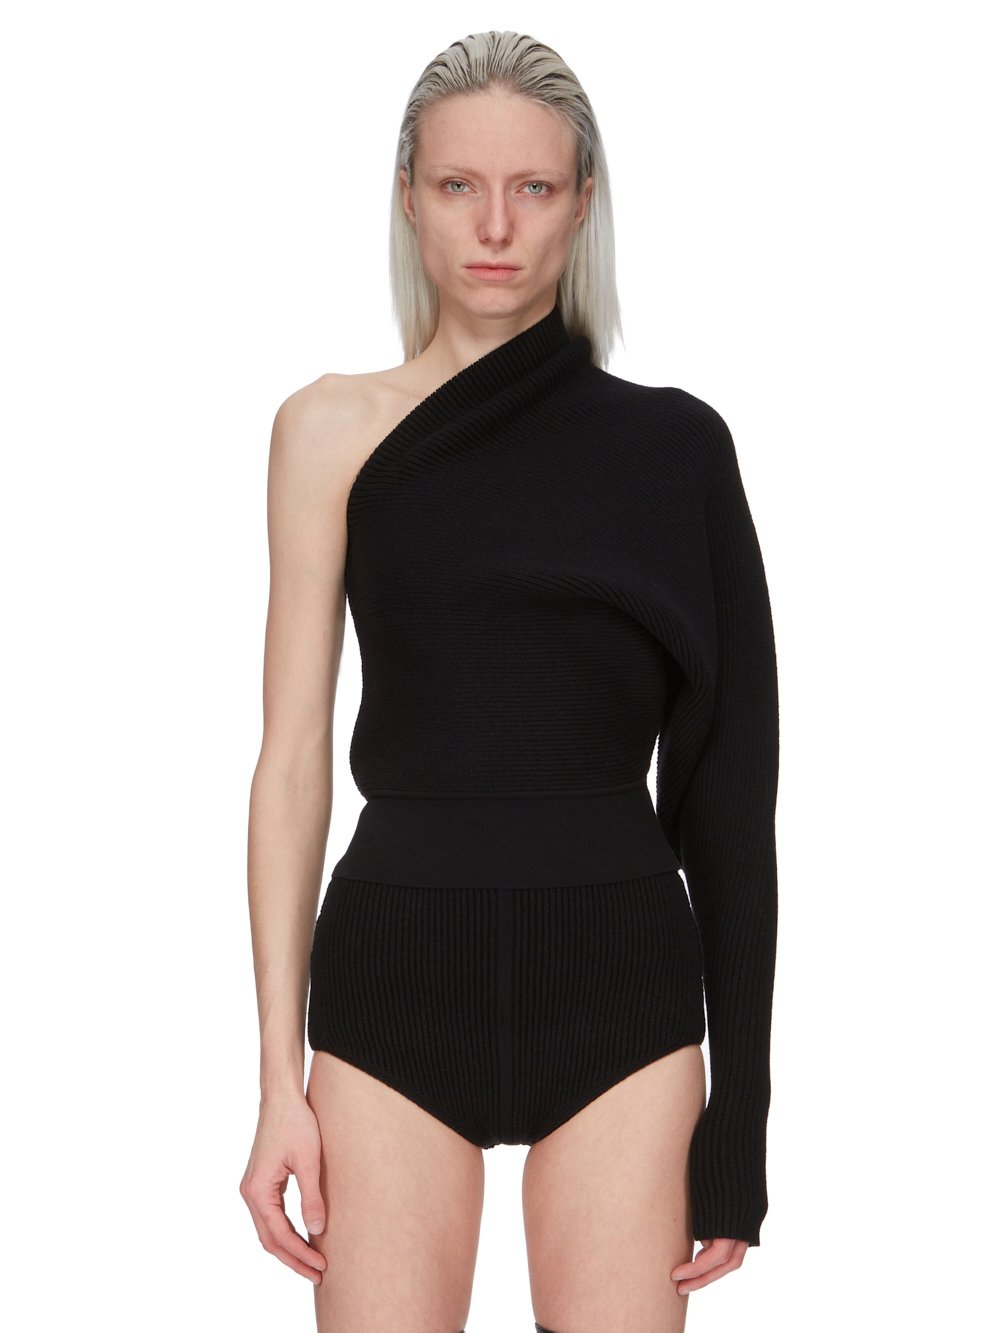 RICK OWENS FW23 LUXOR RUNWAY ONE SLEEVE TOP IN BLACK HEAVY RIB RECYCLED CASHMERE